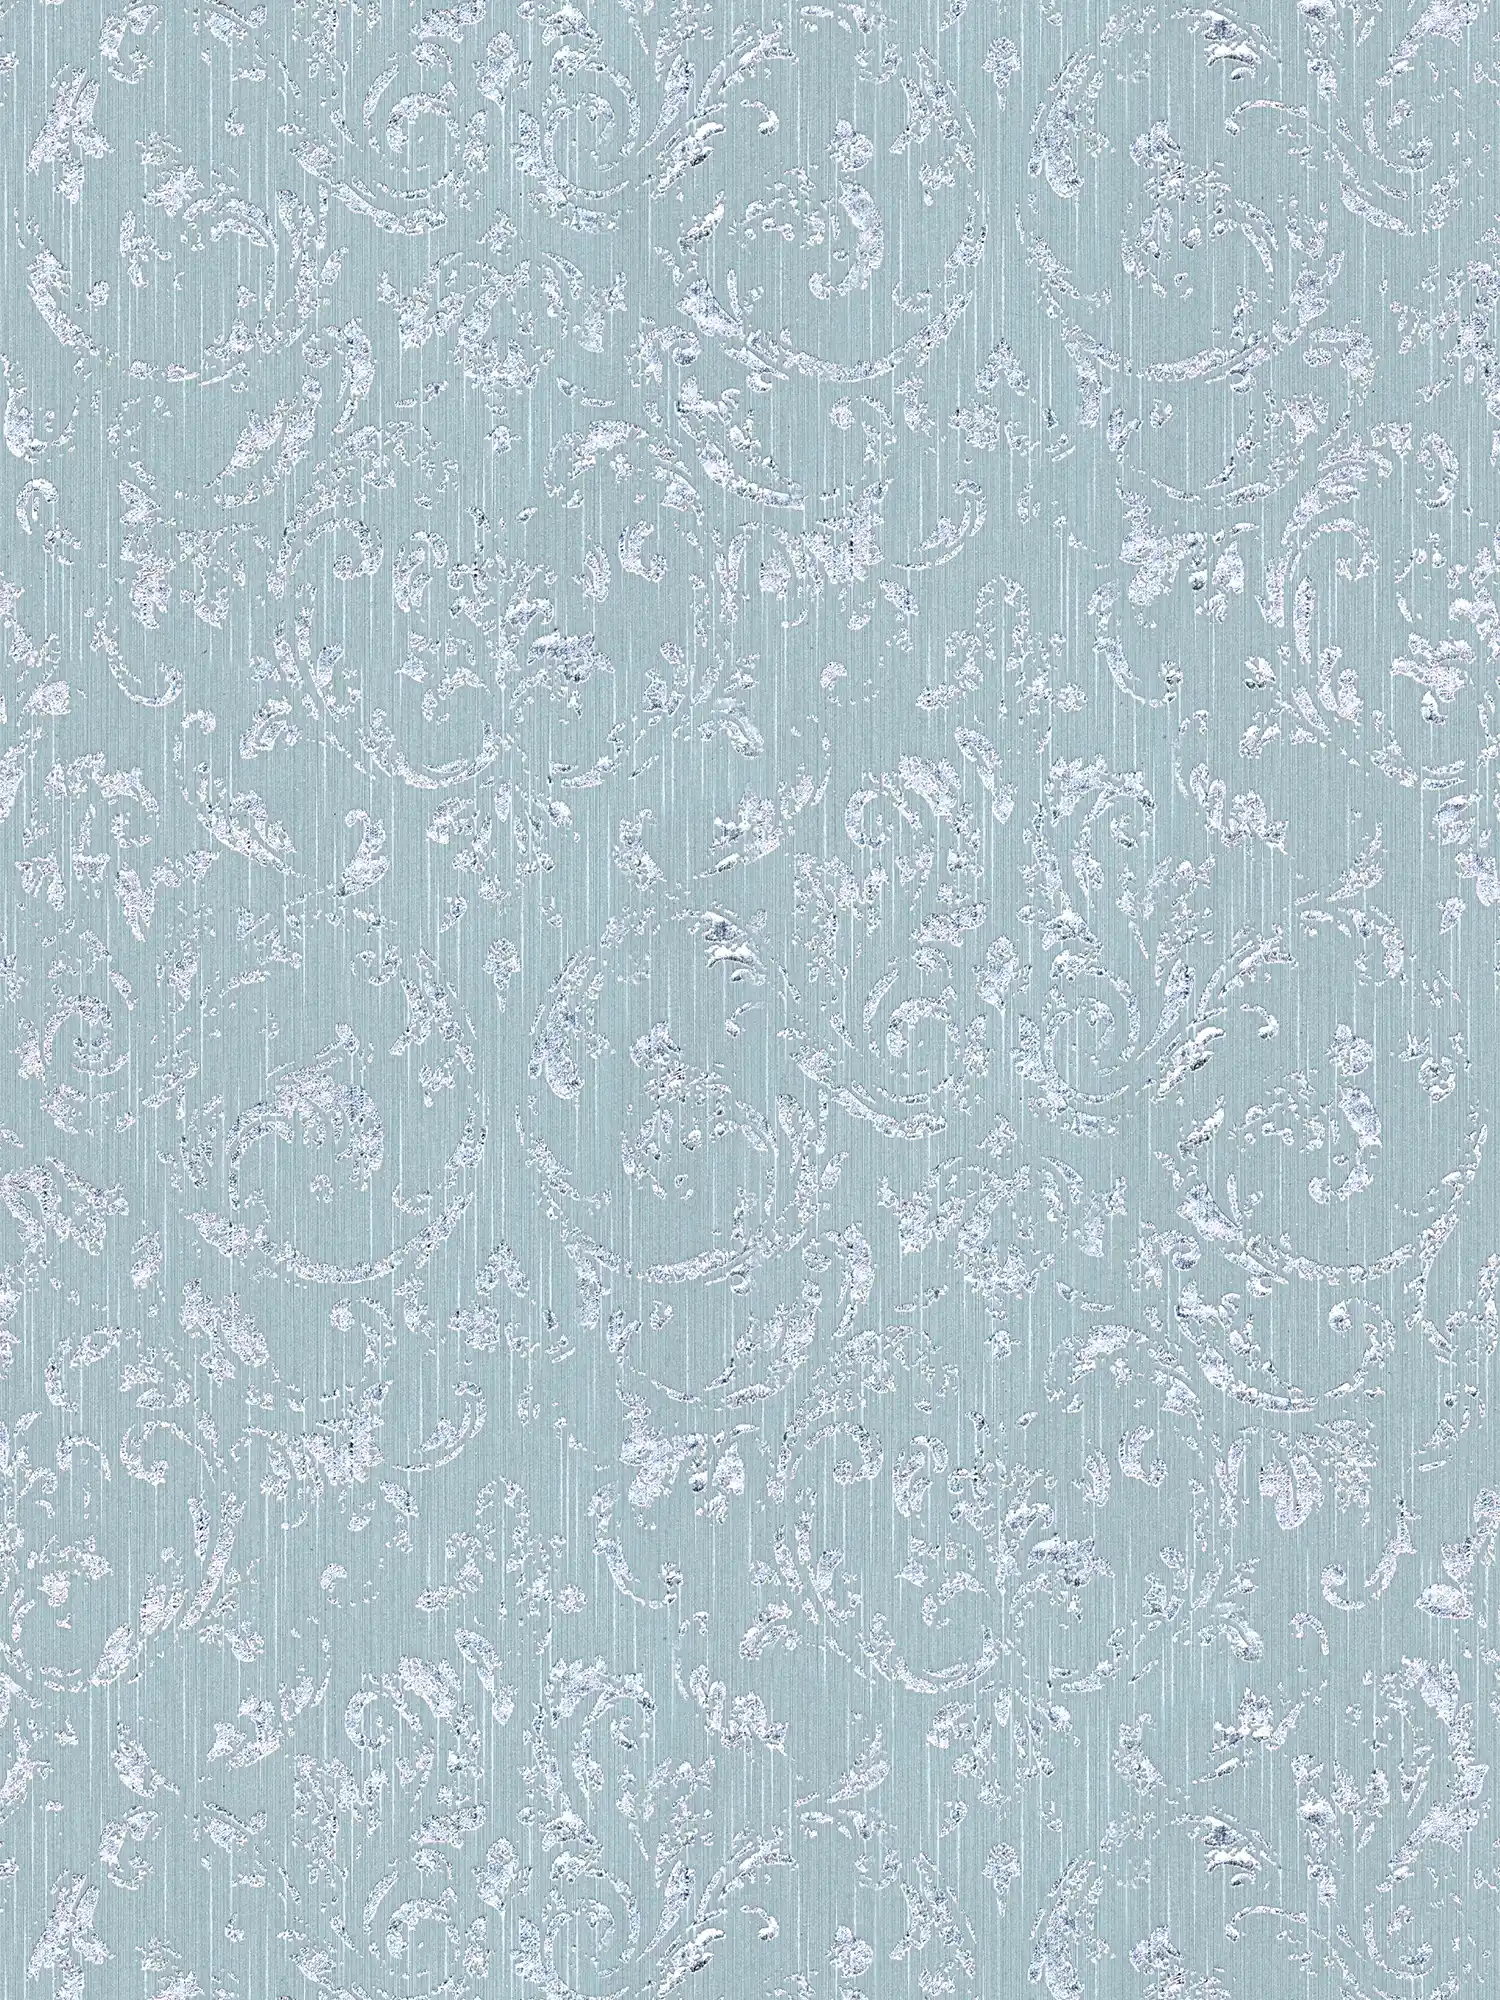 Wallpaper with silver ornaments in used look - blue, green
